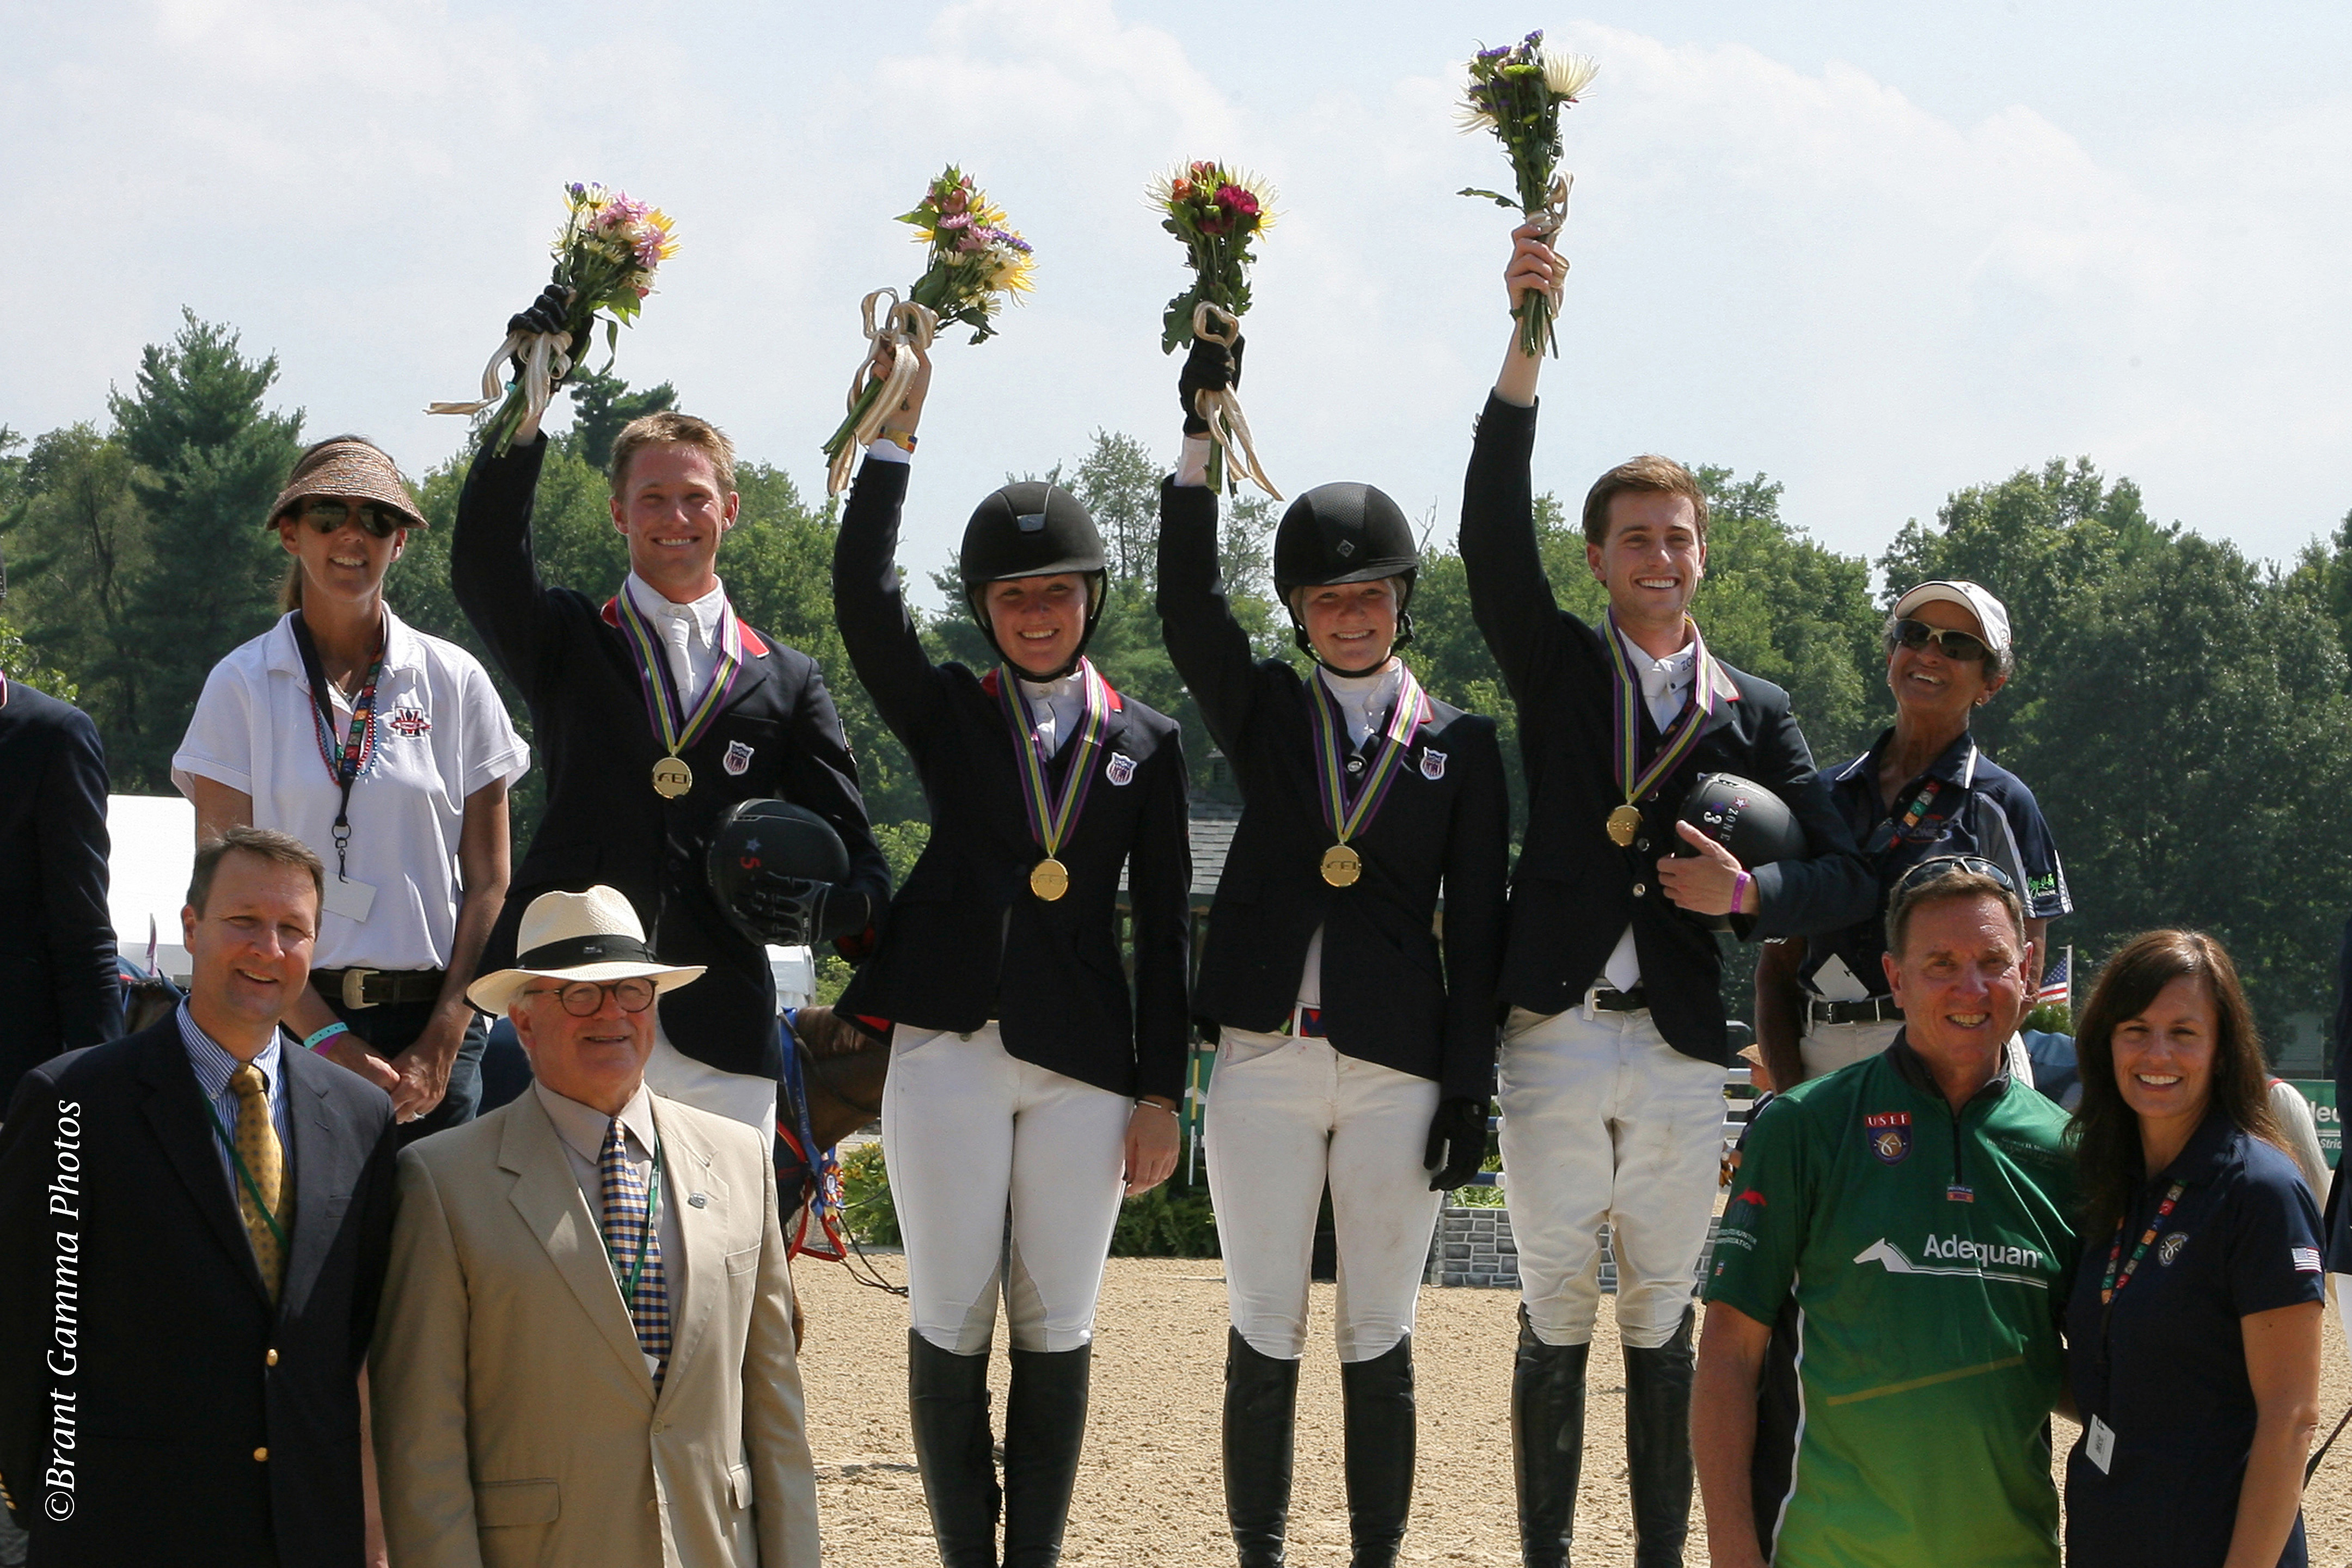 Young rider Team jumper Gold medalists.  Left to right. Back row Abby Blankenship,Chef d'equipe, Kalvin Dobbs, Meredith Darst,Noel Fauntleroy,and Jacob Pope. Front row Kevin Price,USHJA, Philip Rozon,President of the ground jury,Allyn Mann (director of Luitpold Animal Health – Adequan),and Lori Nelson, USEF.